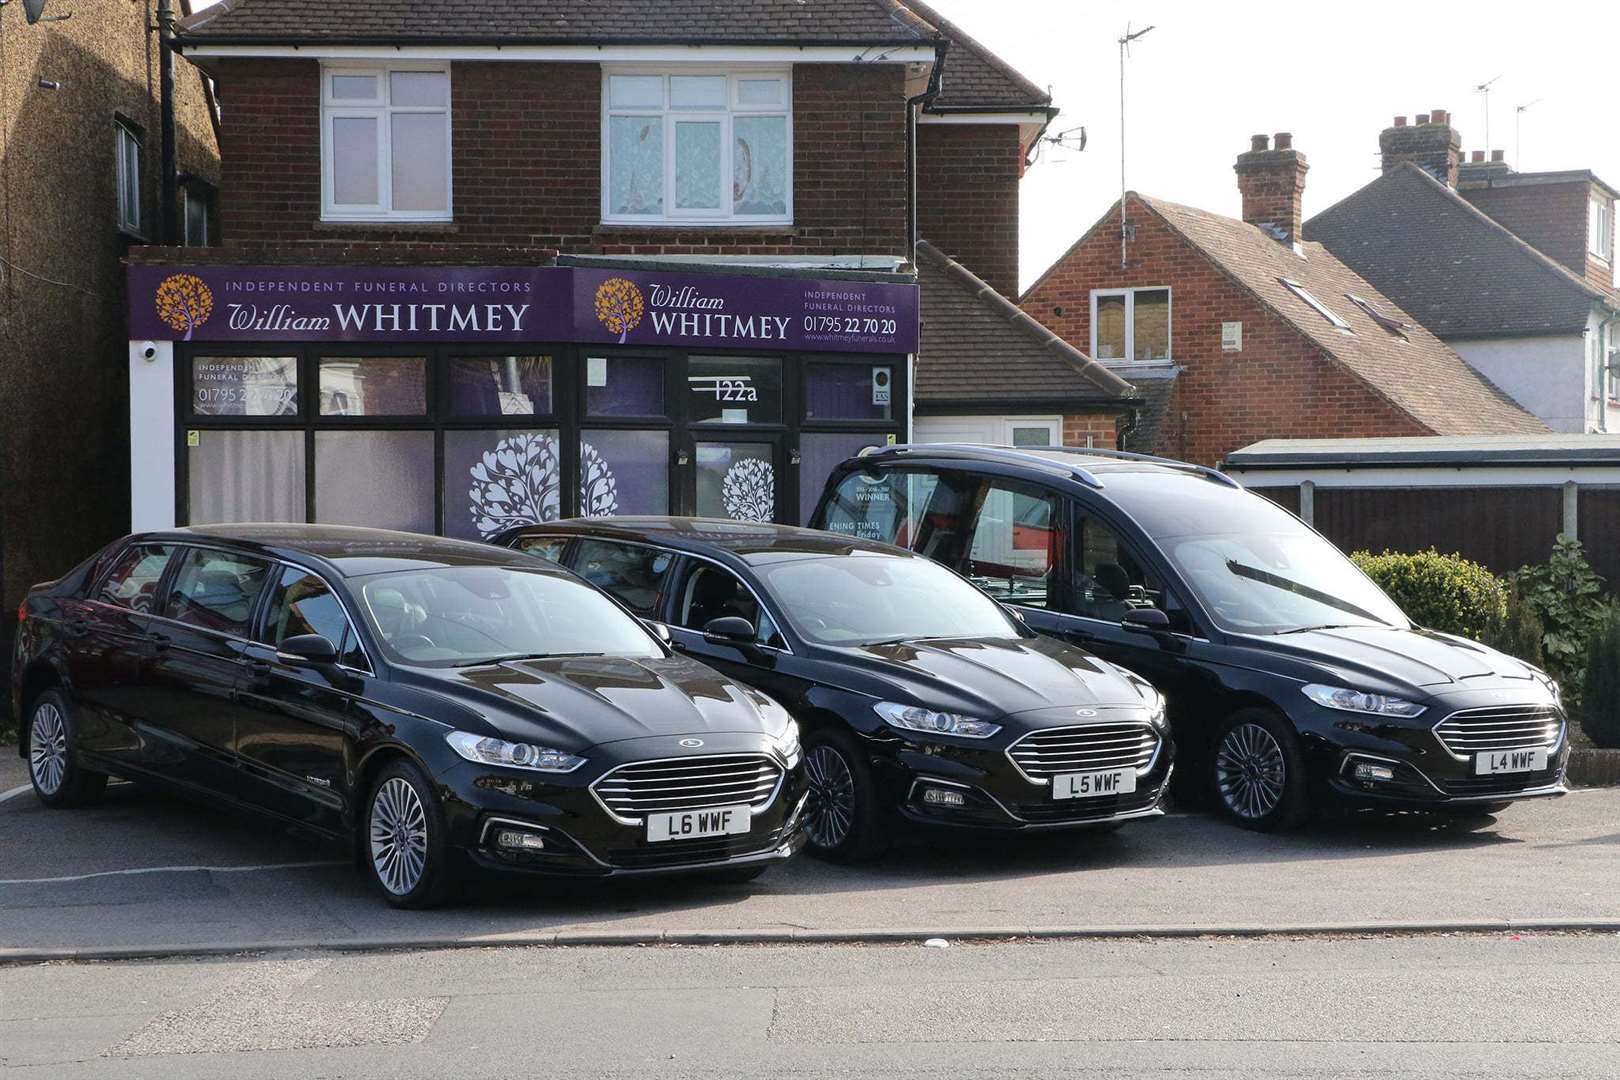 Sittingbourne undertakers William Whitmey Funeral Directors have taken delivery of a new fleet of eco-friendly hybrid limousines and hearse worth £335,000